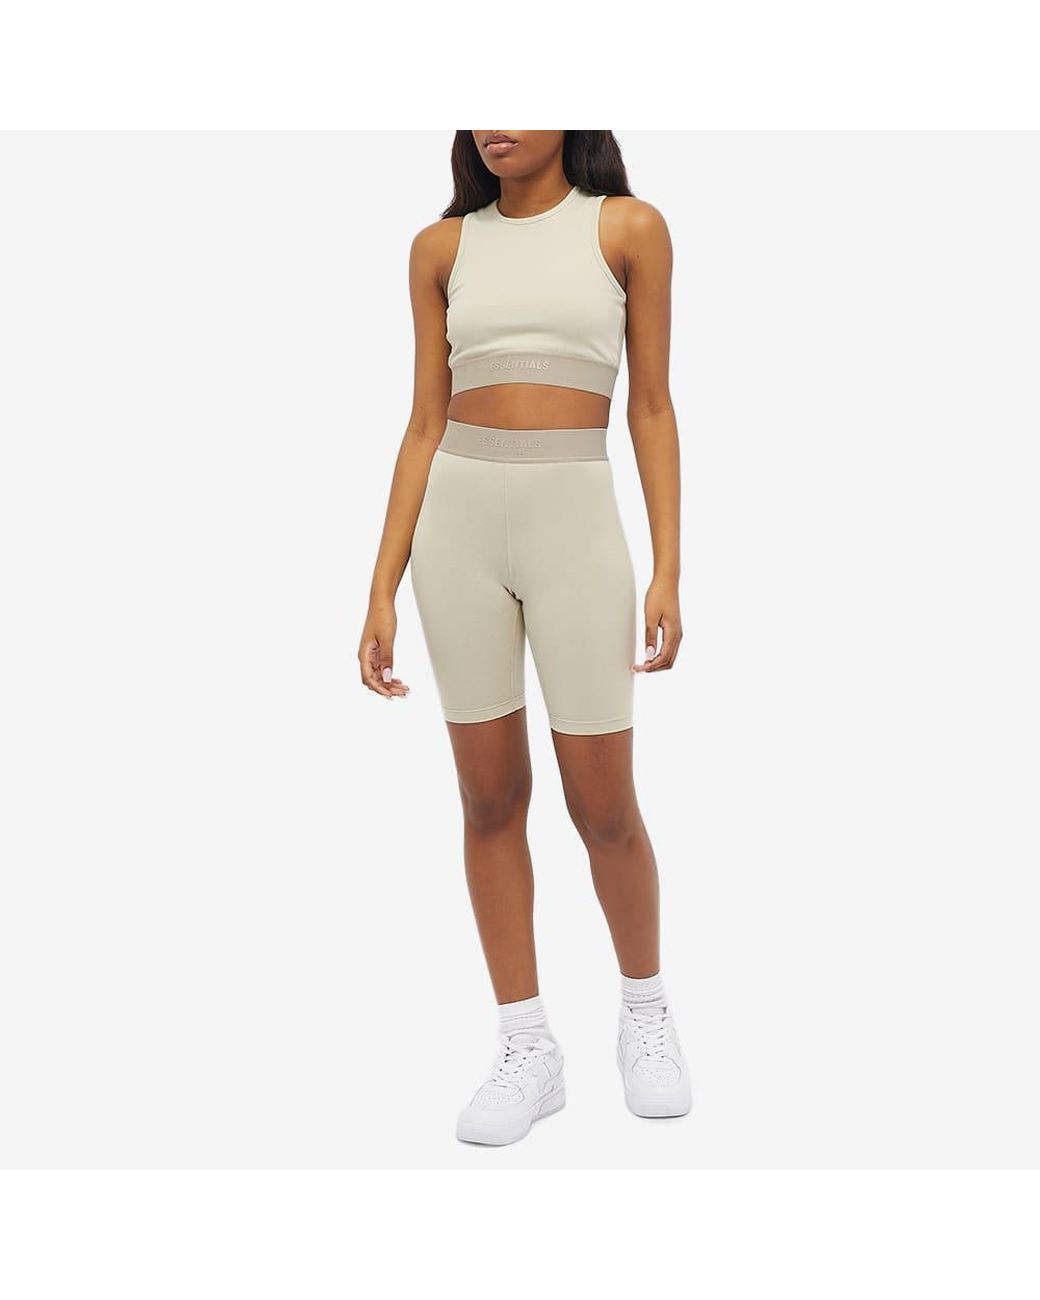 Fear Of God Sports Bra in Natural